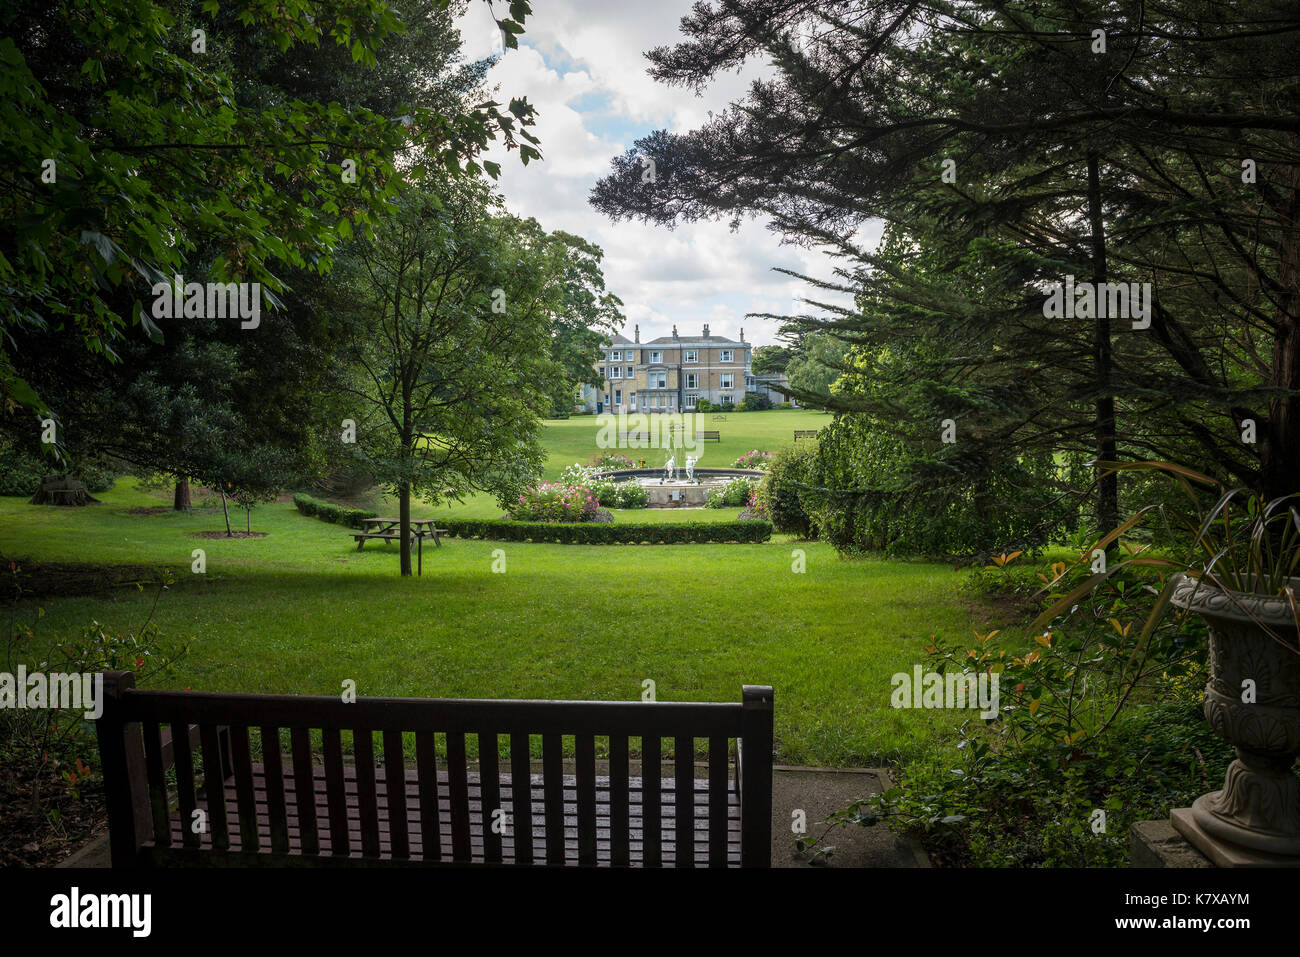 The gardens and grounds of Quex Park, Kent, UK Stock Photo